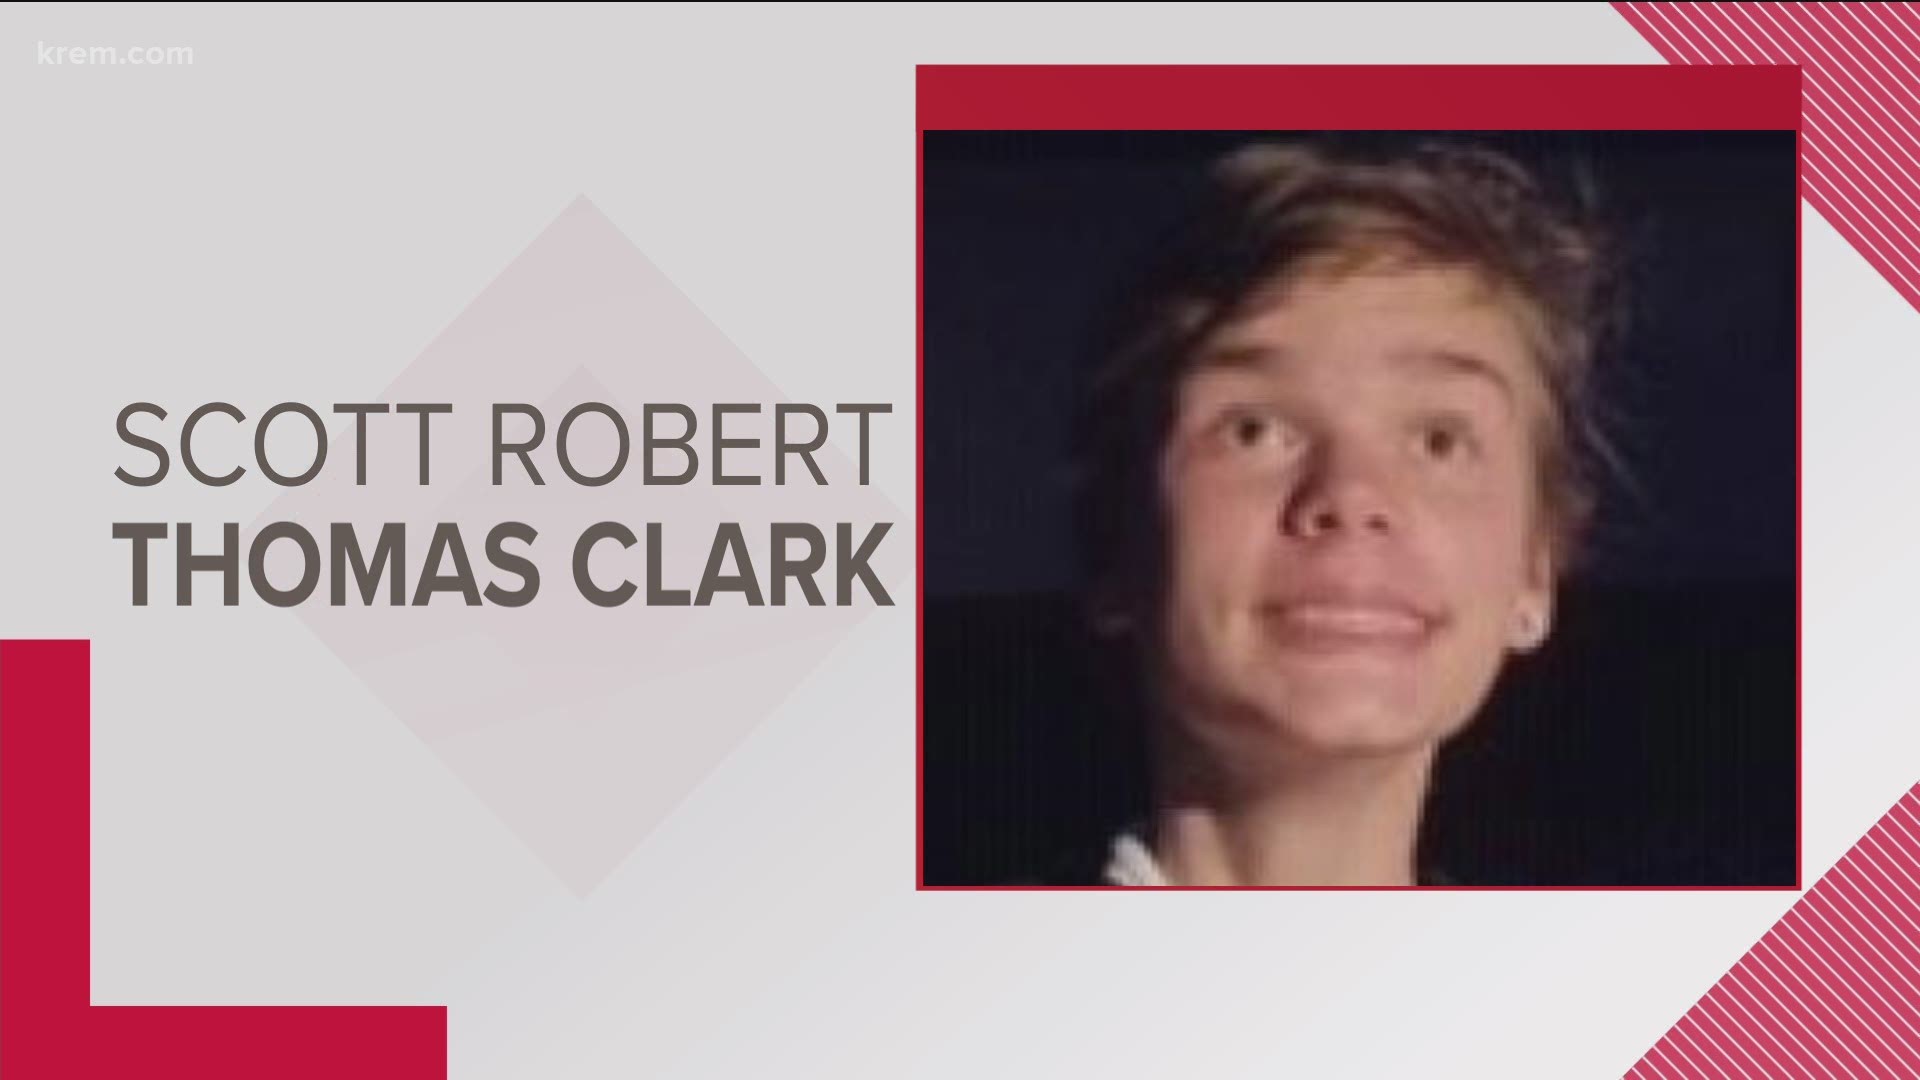 Scott Robert Thomas Clark is a 16-year-old male with blonde hair and blue eyes.